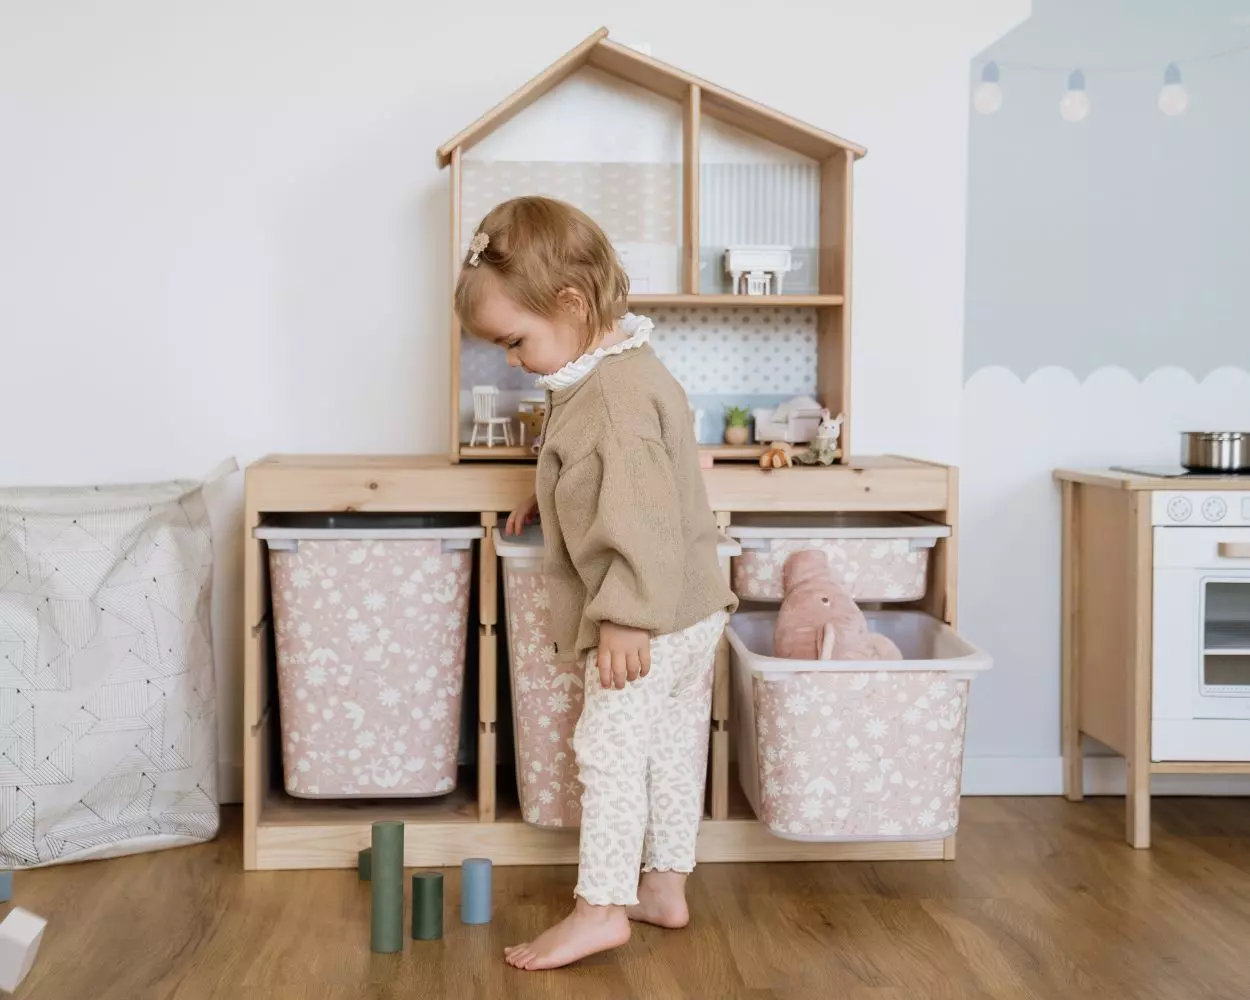 KonMarie in the children's room: tidying up according to Marie Kondo